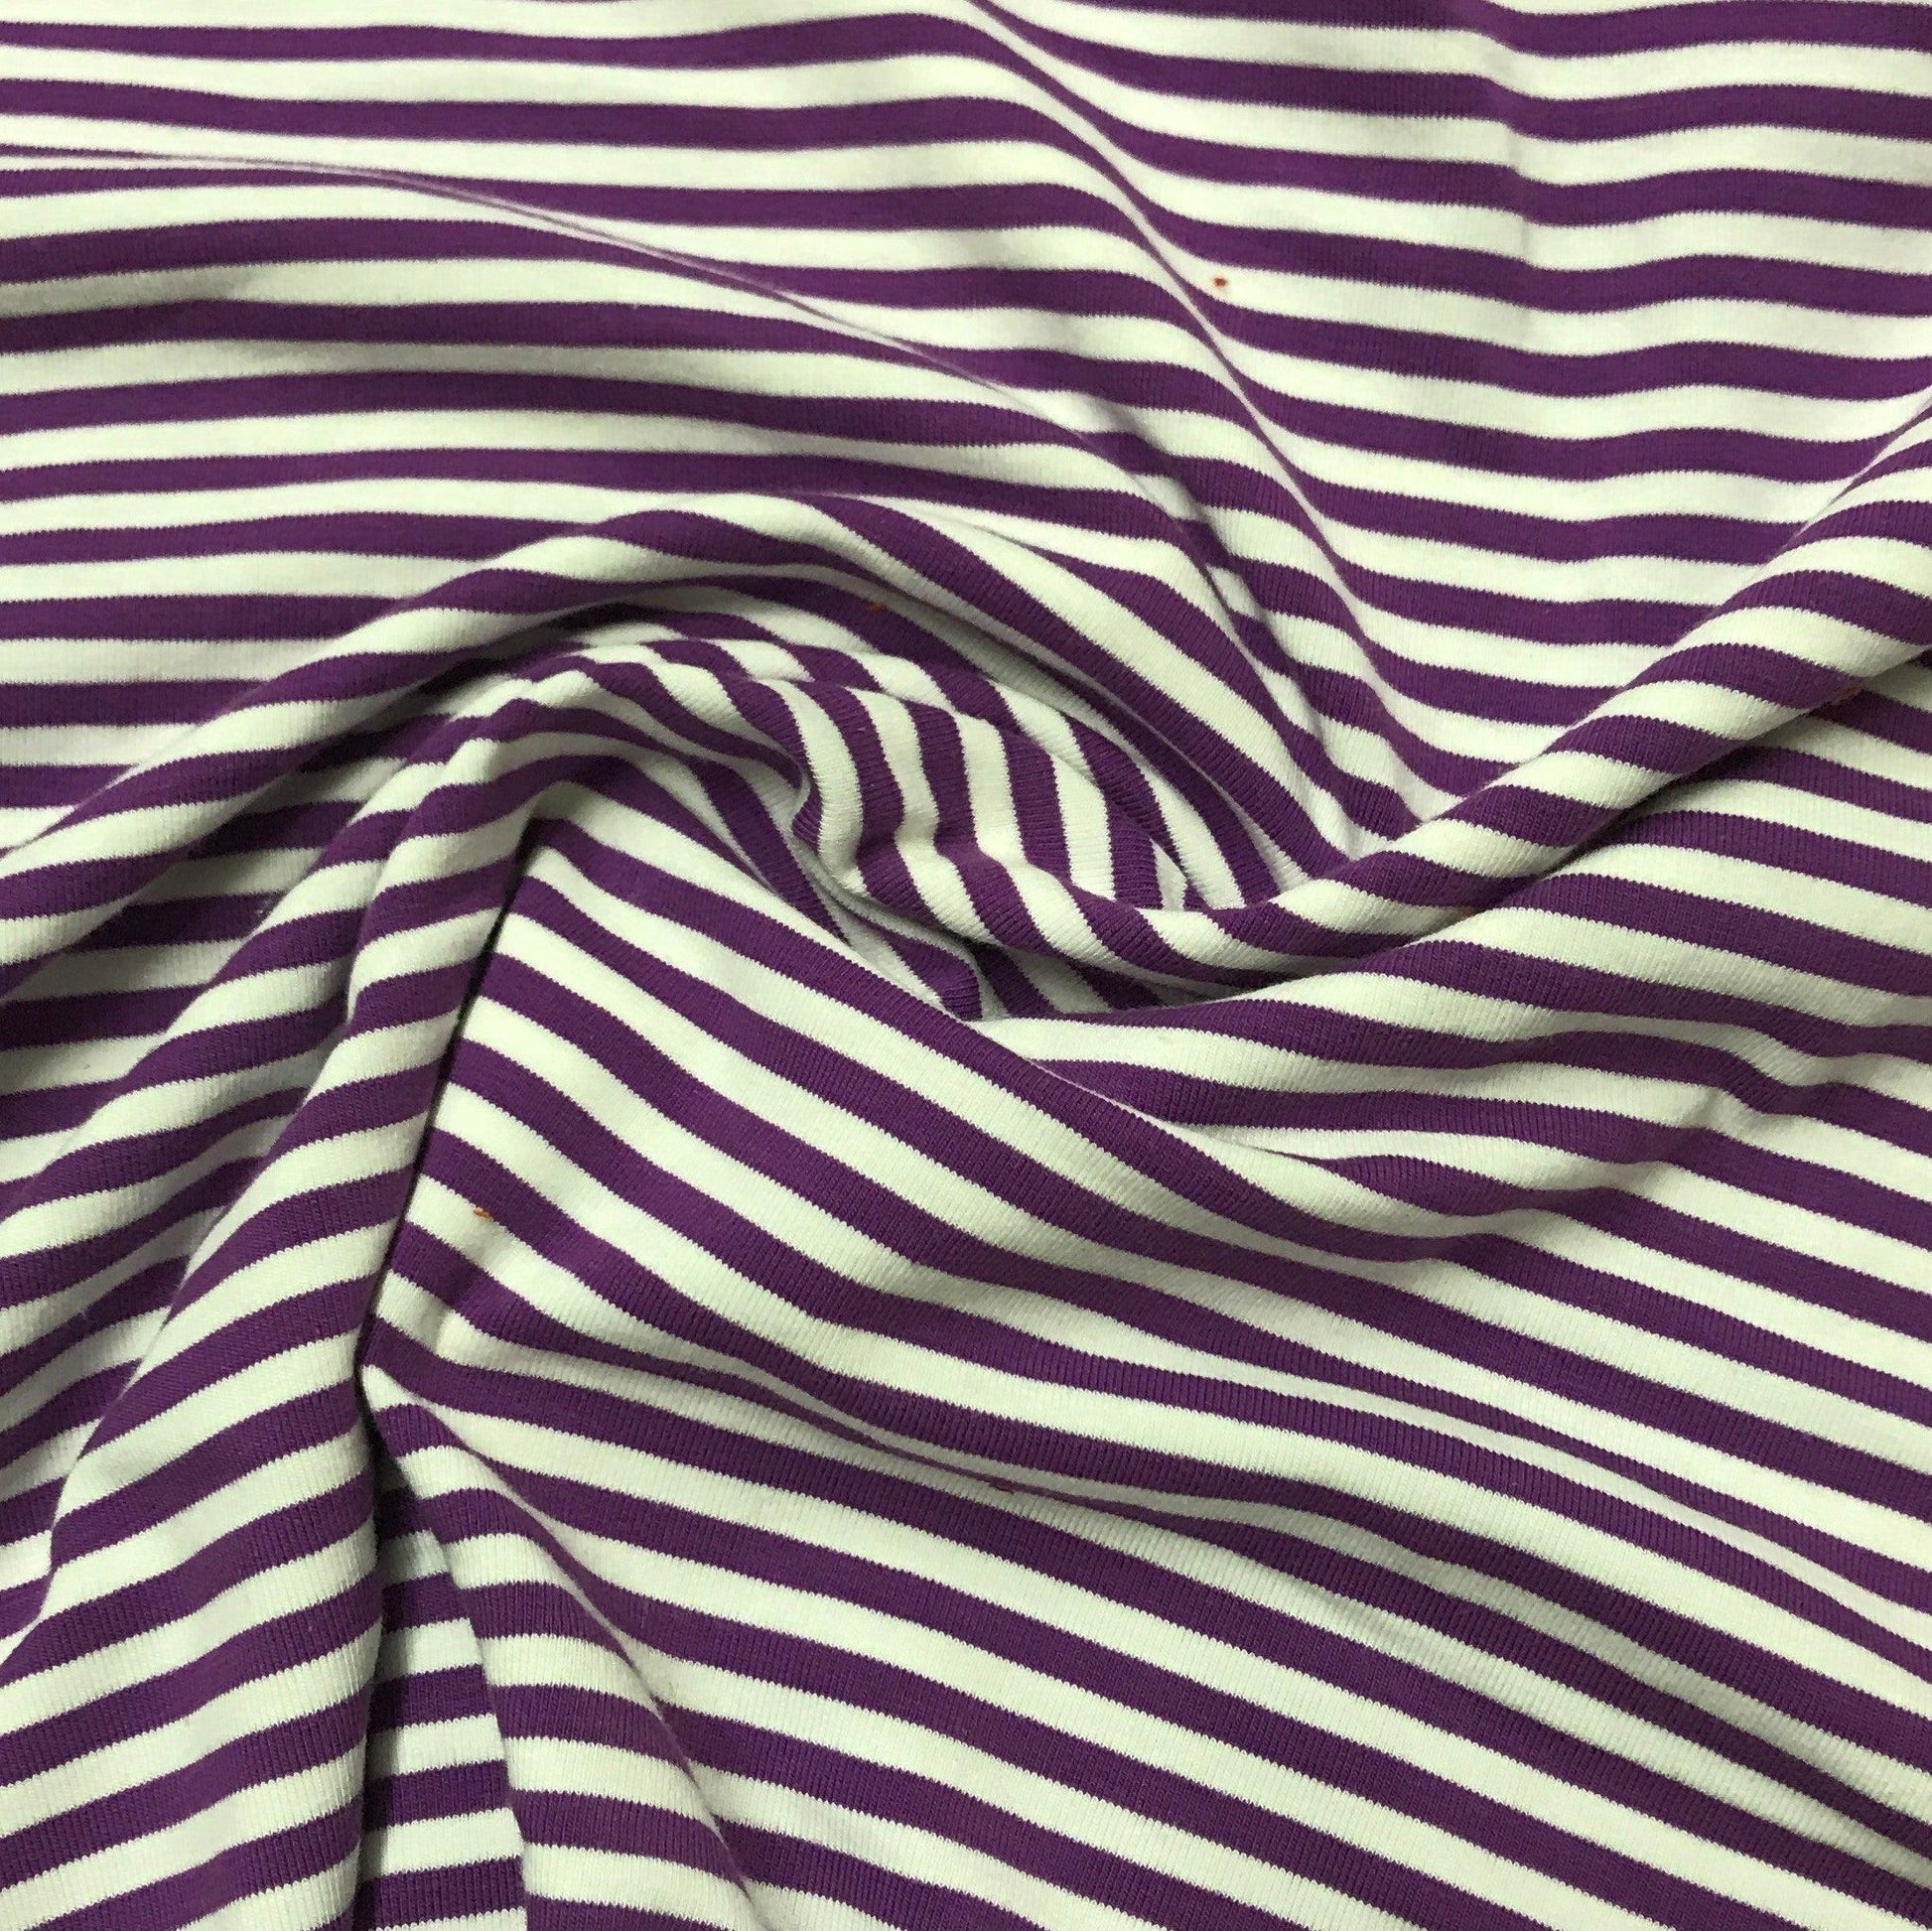 Purple and White 1/8" Stripes on Cotton/Spandex Jersey